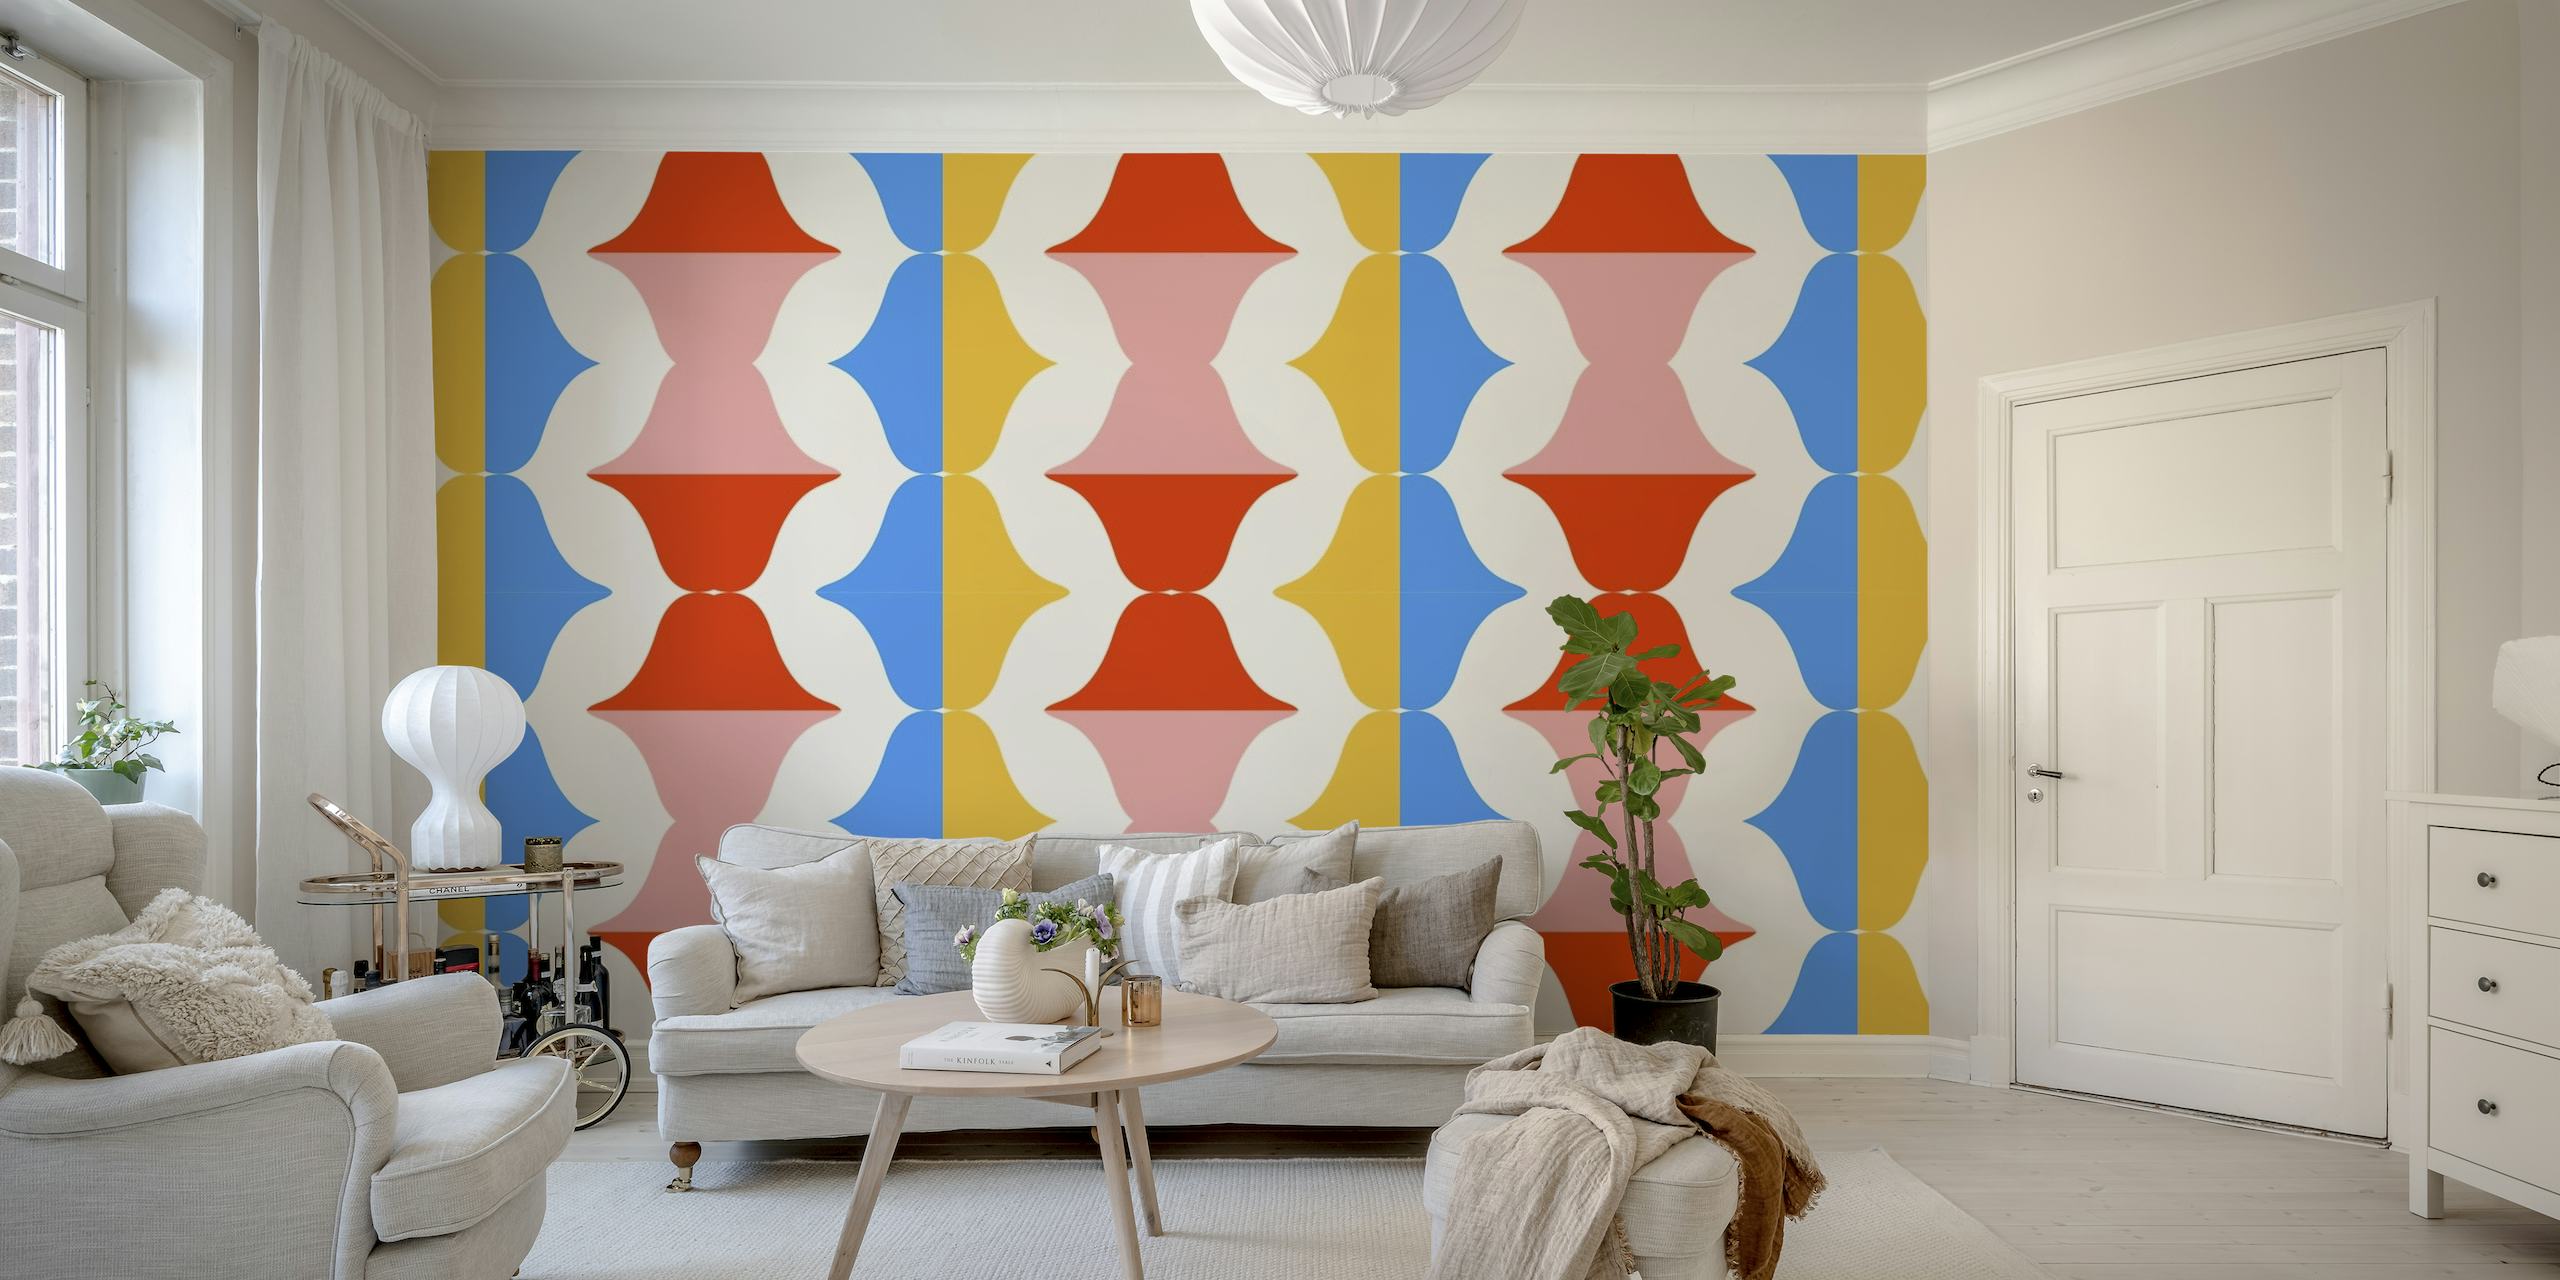 Retro-inspired wall mural featuring pop art style lips pattern on a geometric blue, orange, and pink background.